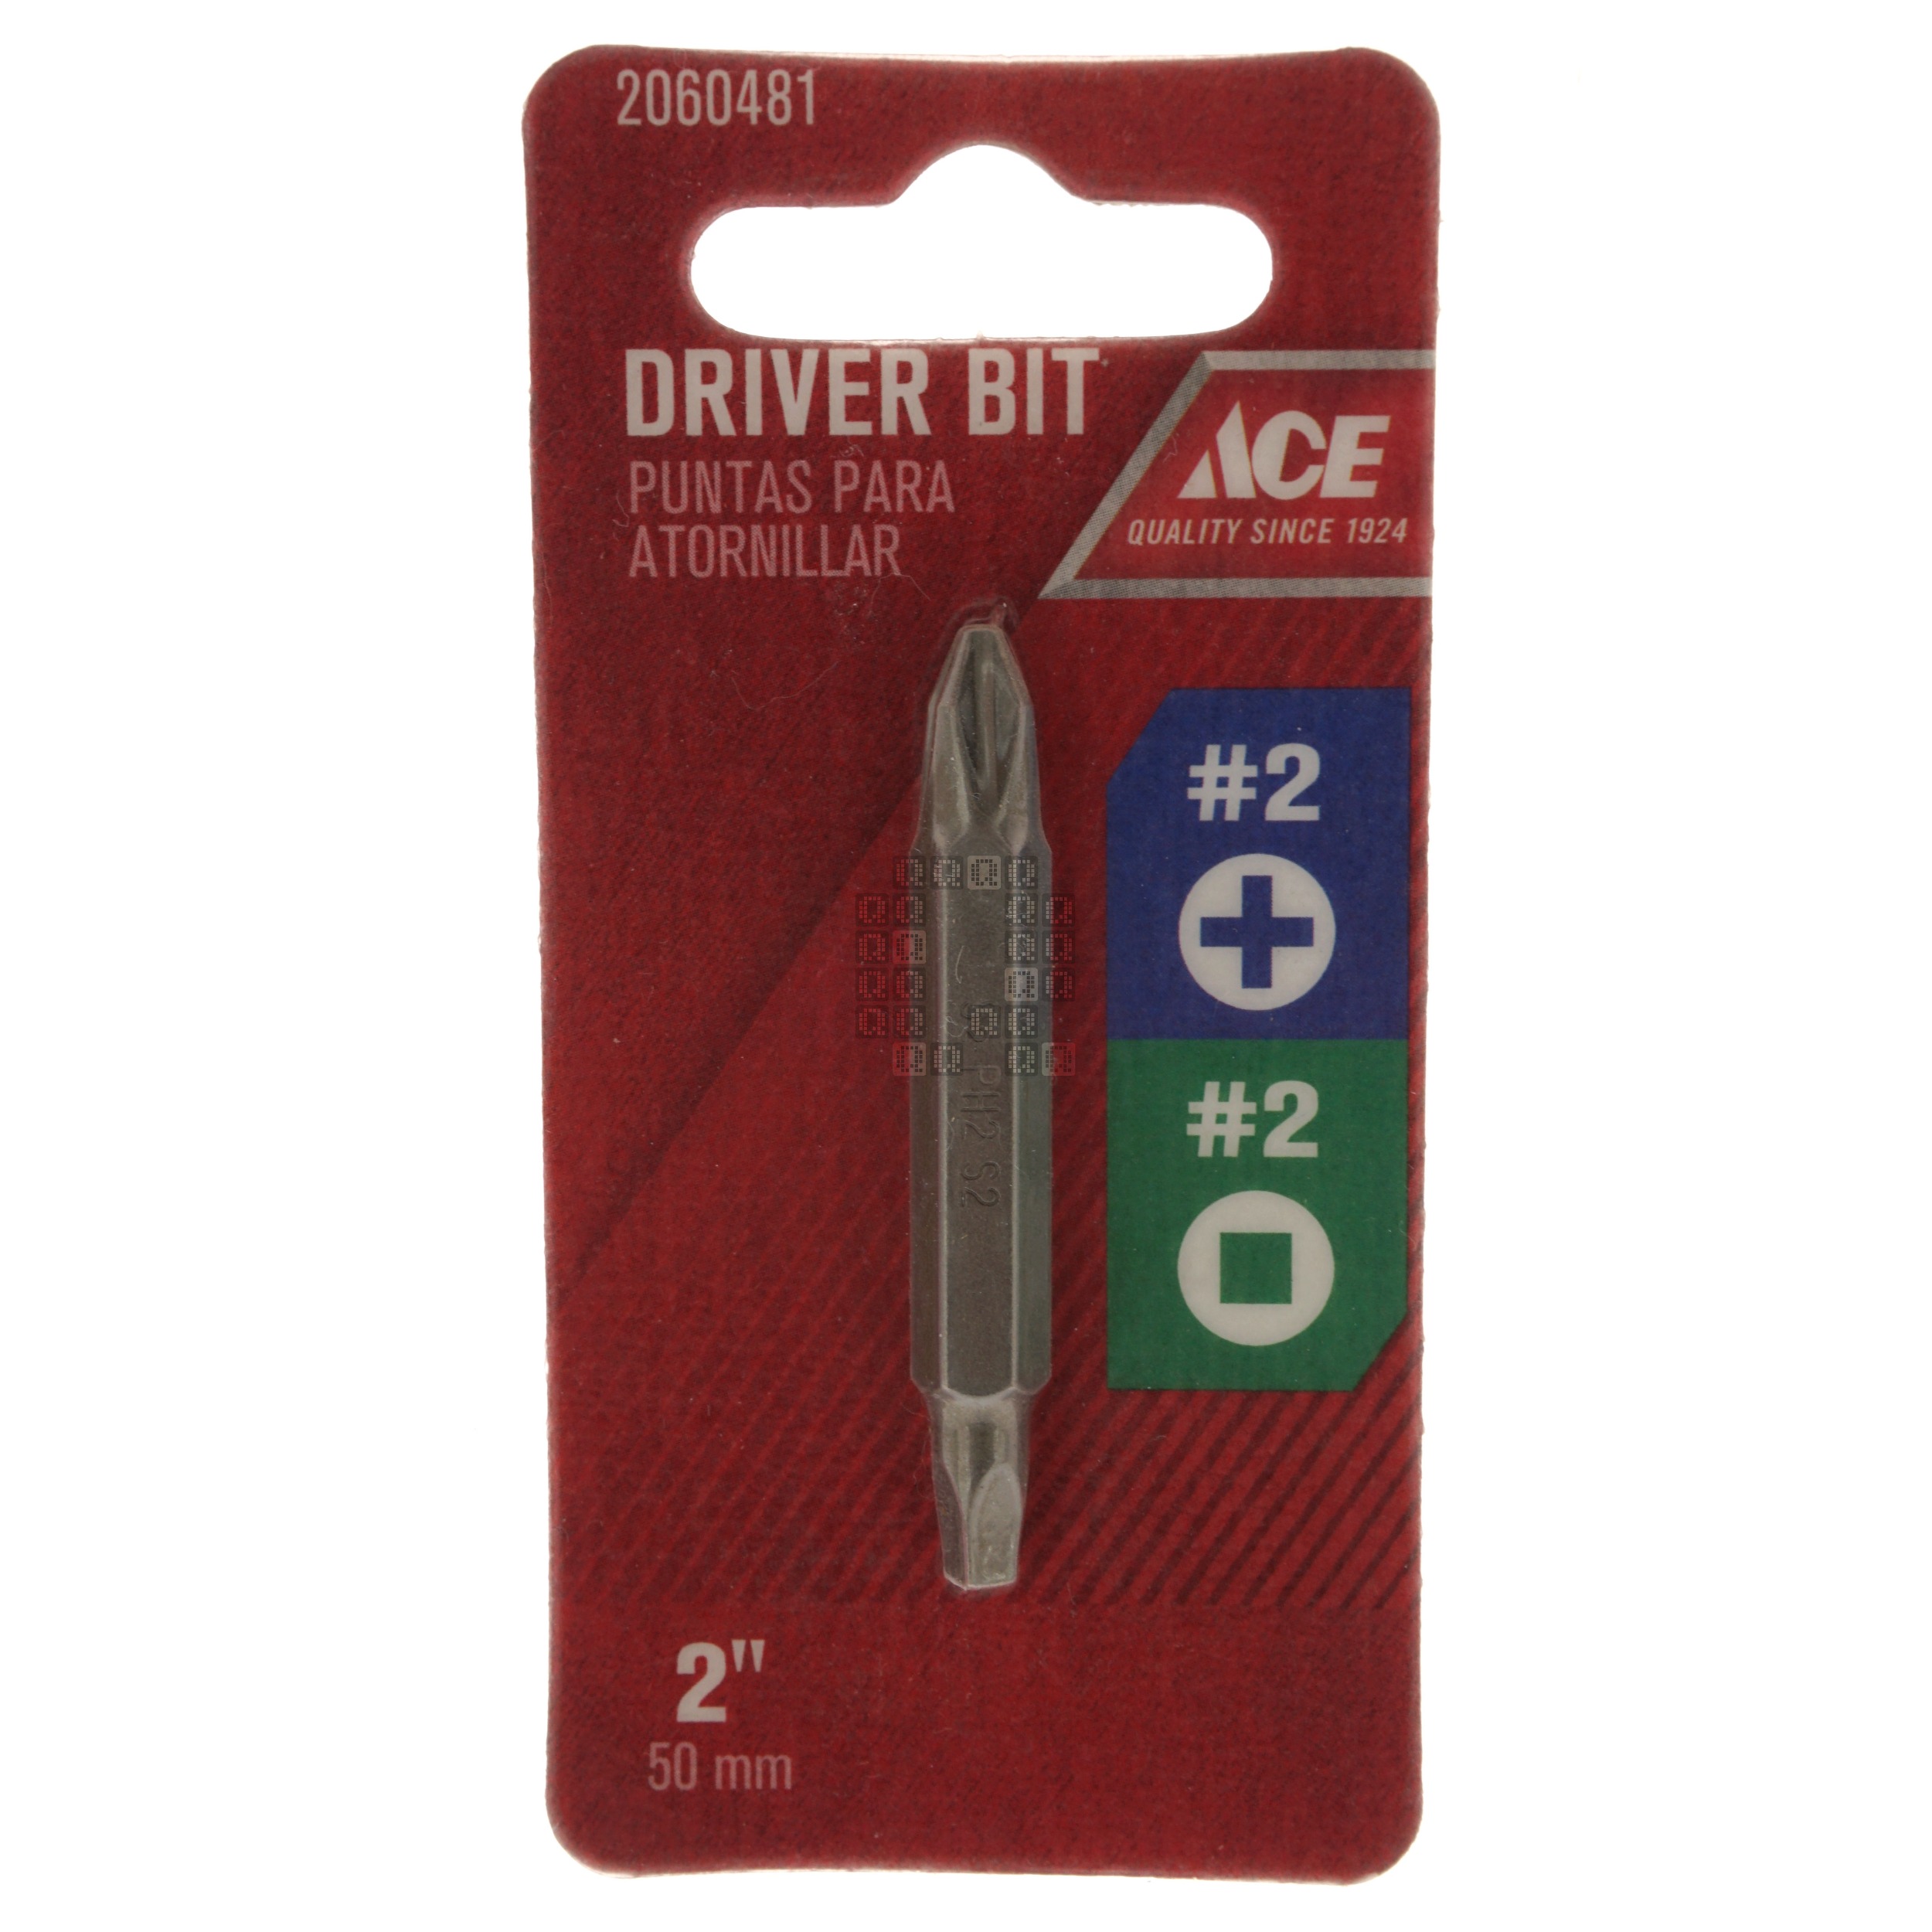 ACE Hardware 2060481 #2 Phillips PH2 / #2 Square SQ2 Double Ended Driver Bit, 2" Length